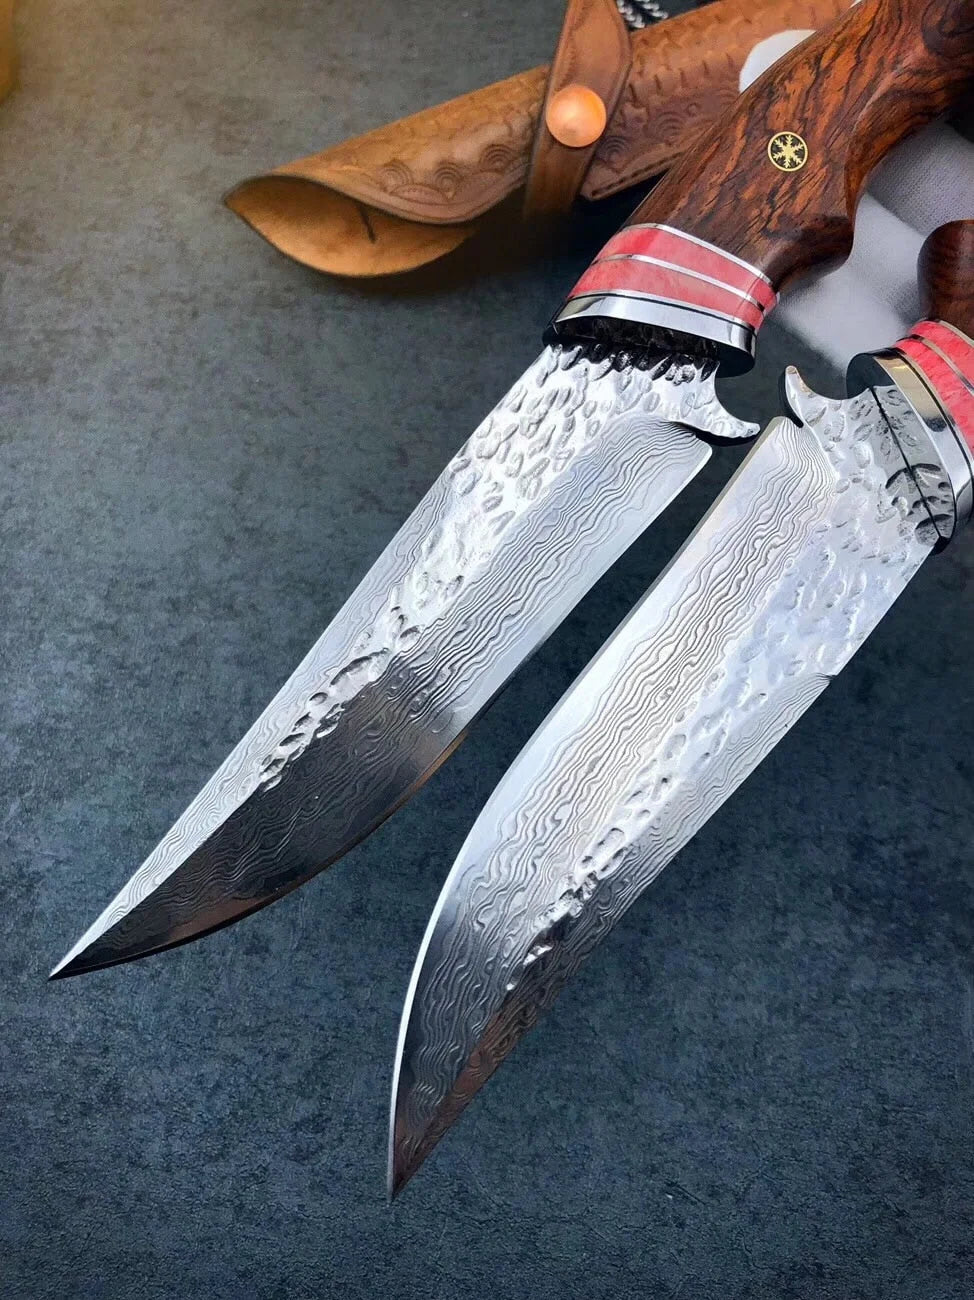 Damascus steel exterior knife with redwood handle